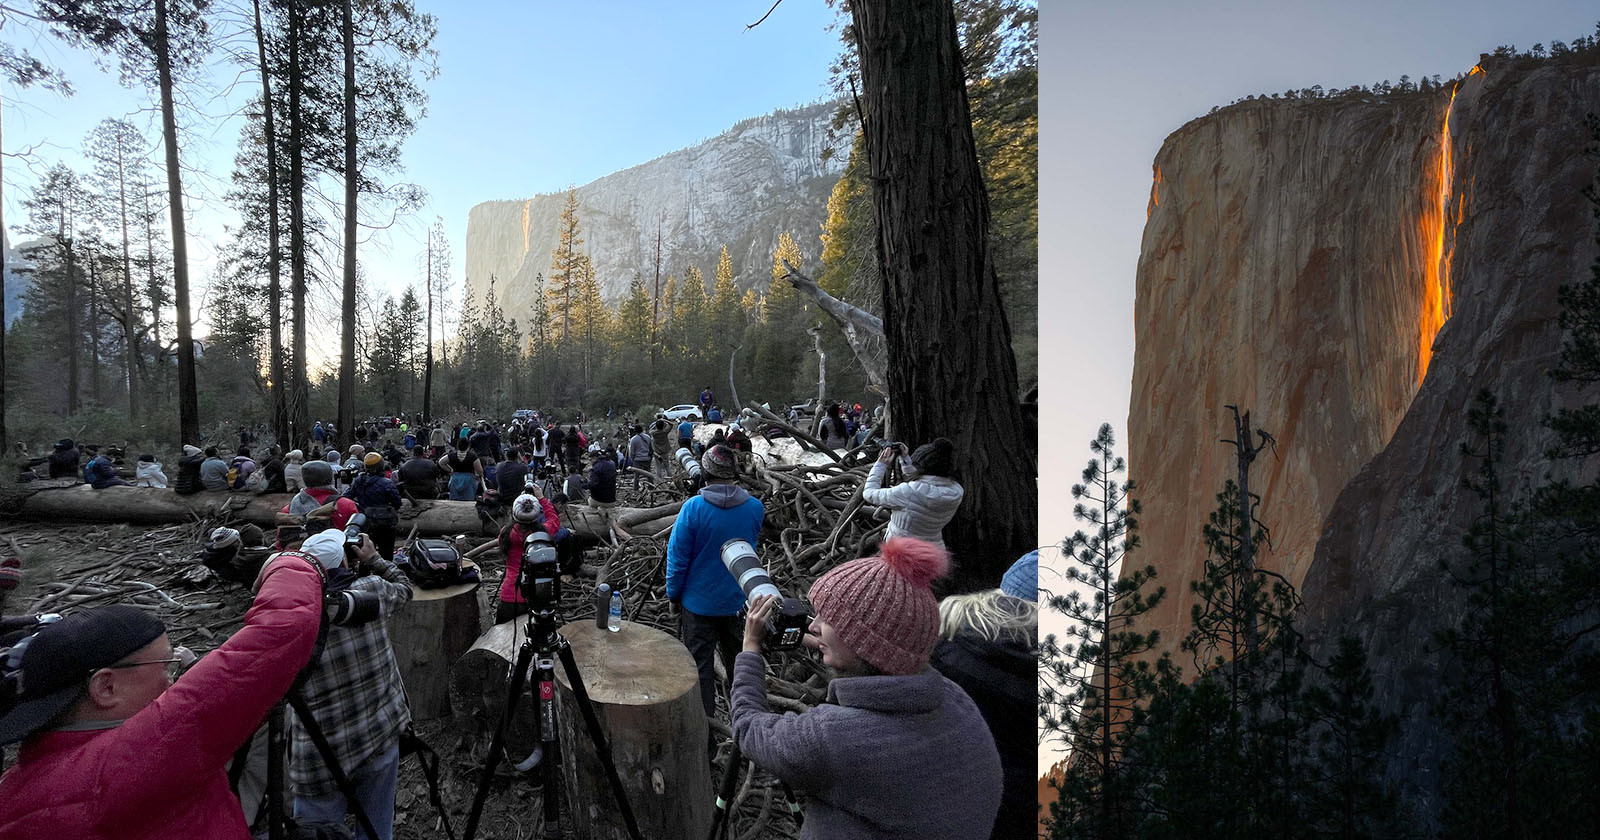 Photographing Yosemite Firefall: The Good, the Bad, and the Ugly